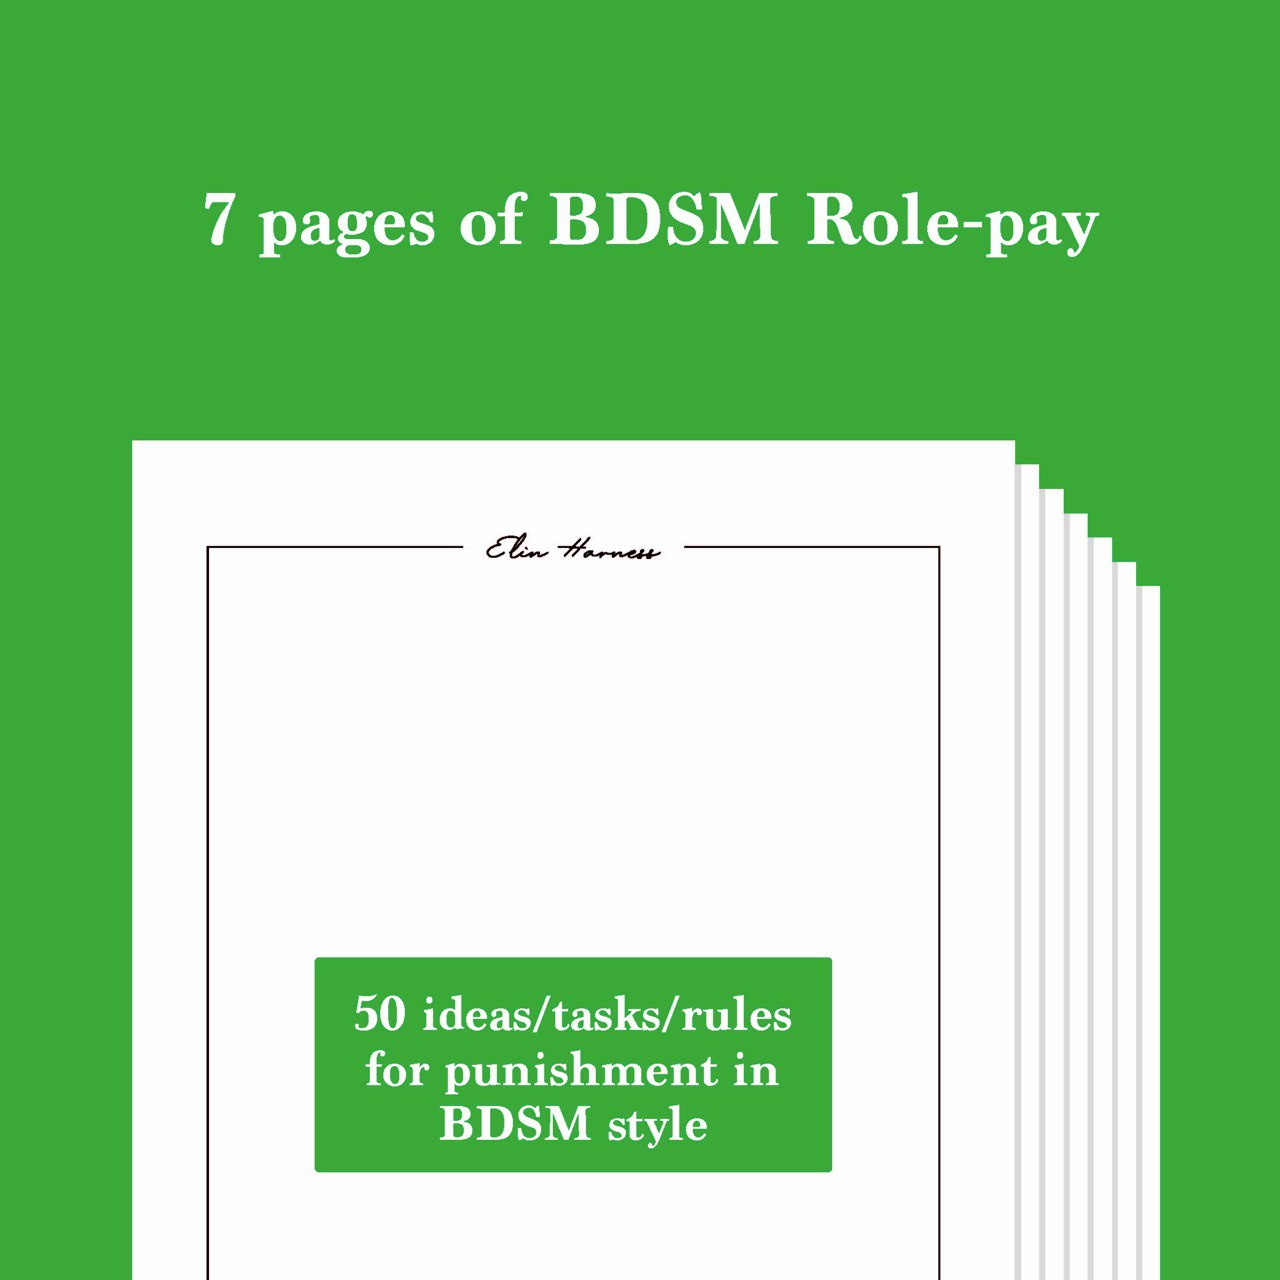 50 ideas/tasks/rules for punishment in BDSM style